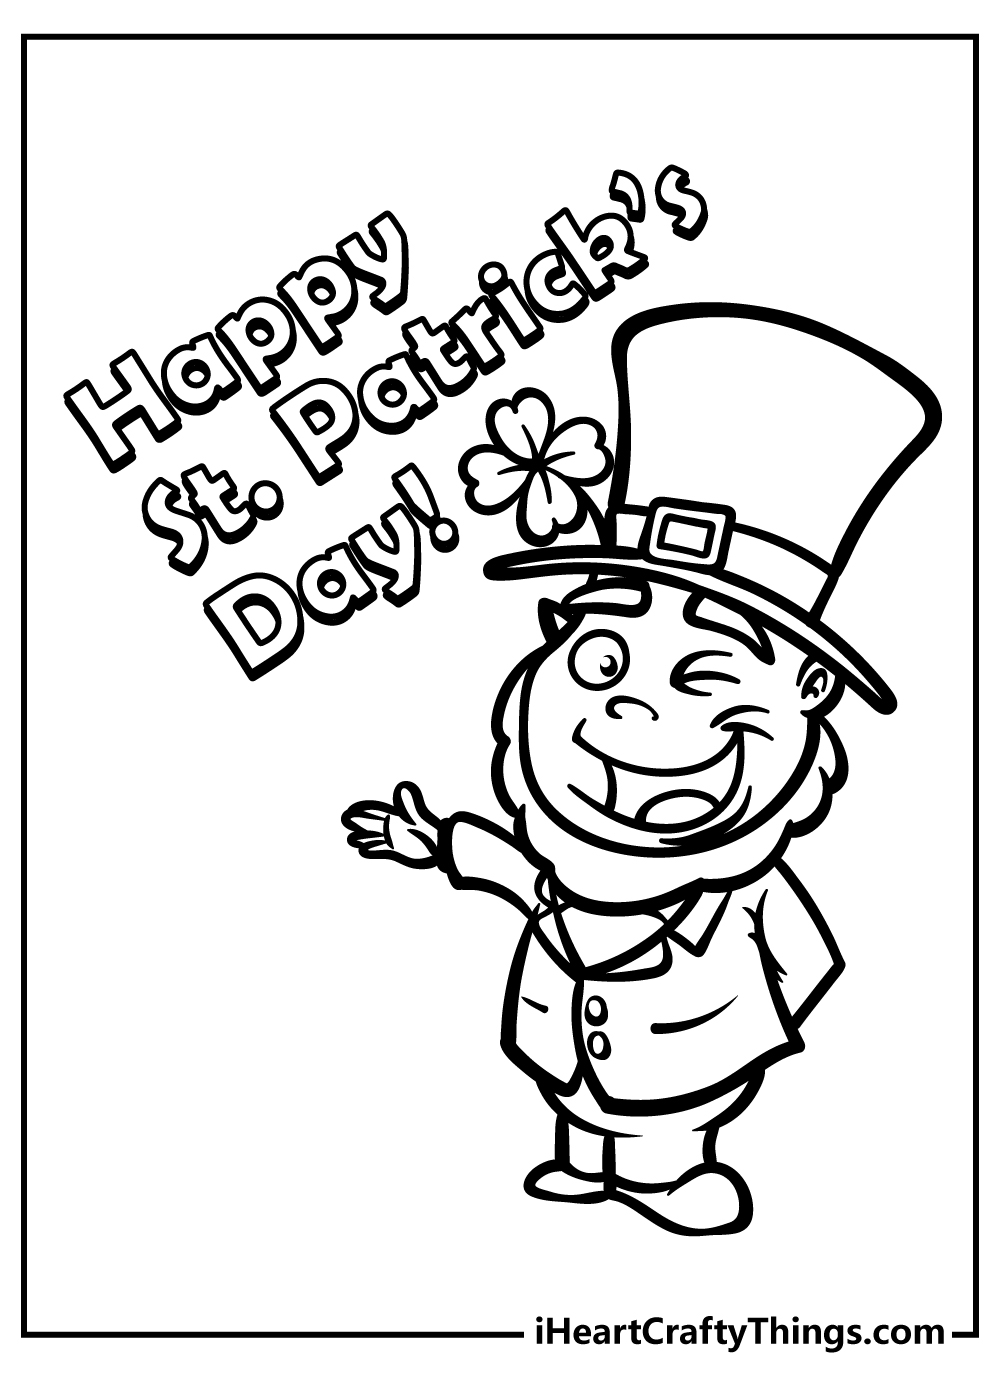 St patricks day coloring pages free printables